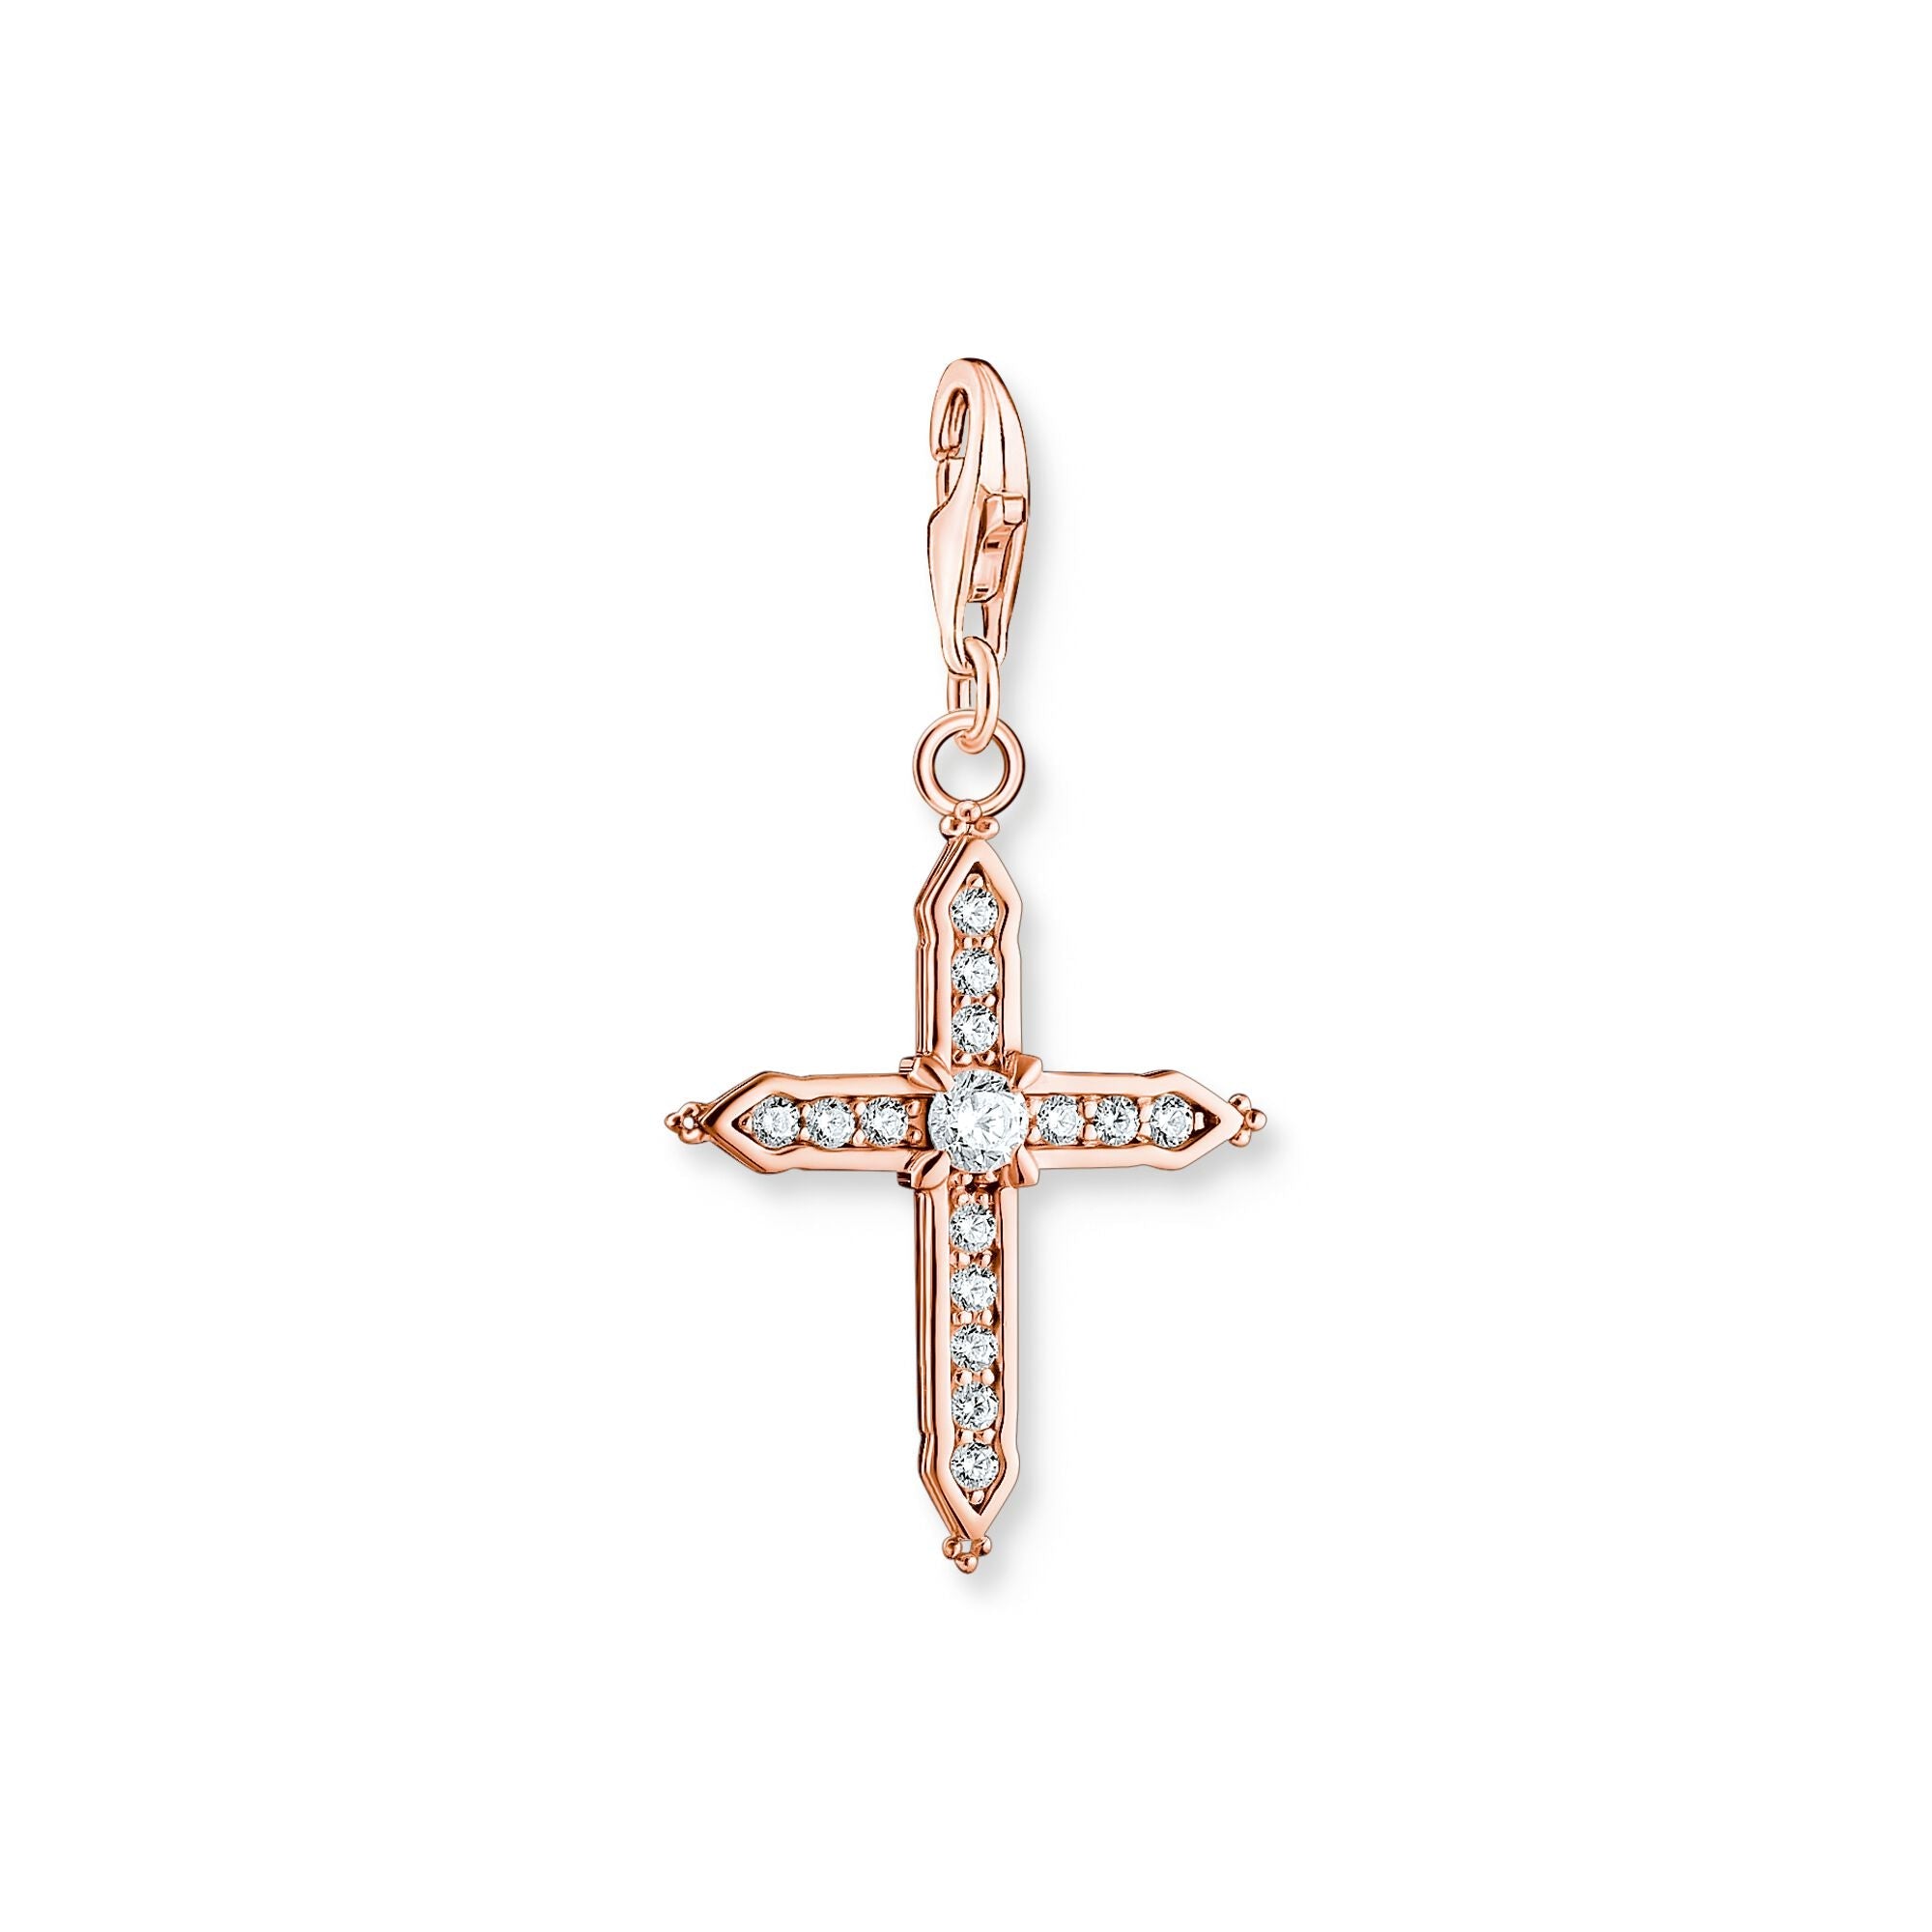 Thomas Sabo Charm Club Rose Gold Plated Sterling Silver White Stones Cross Charm D